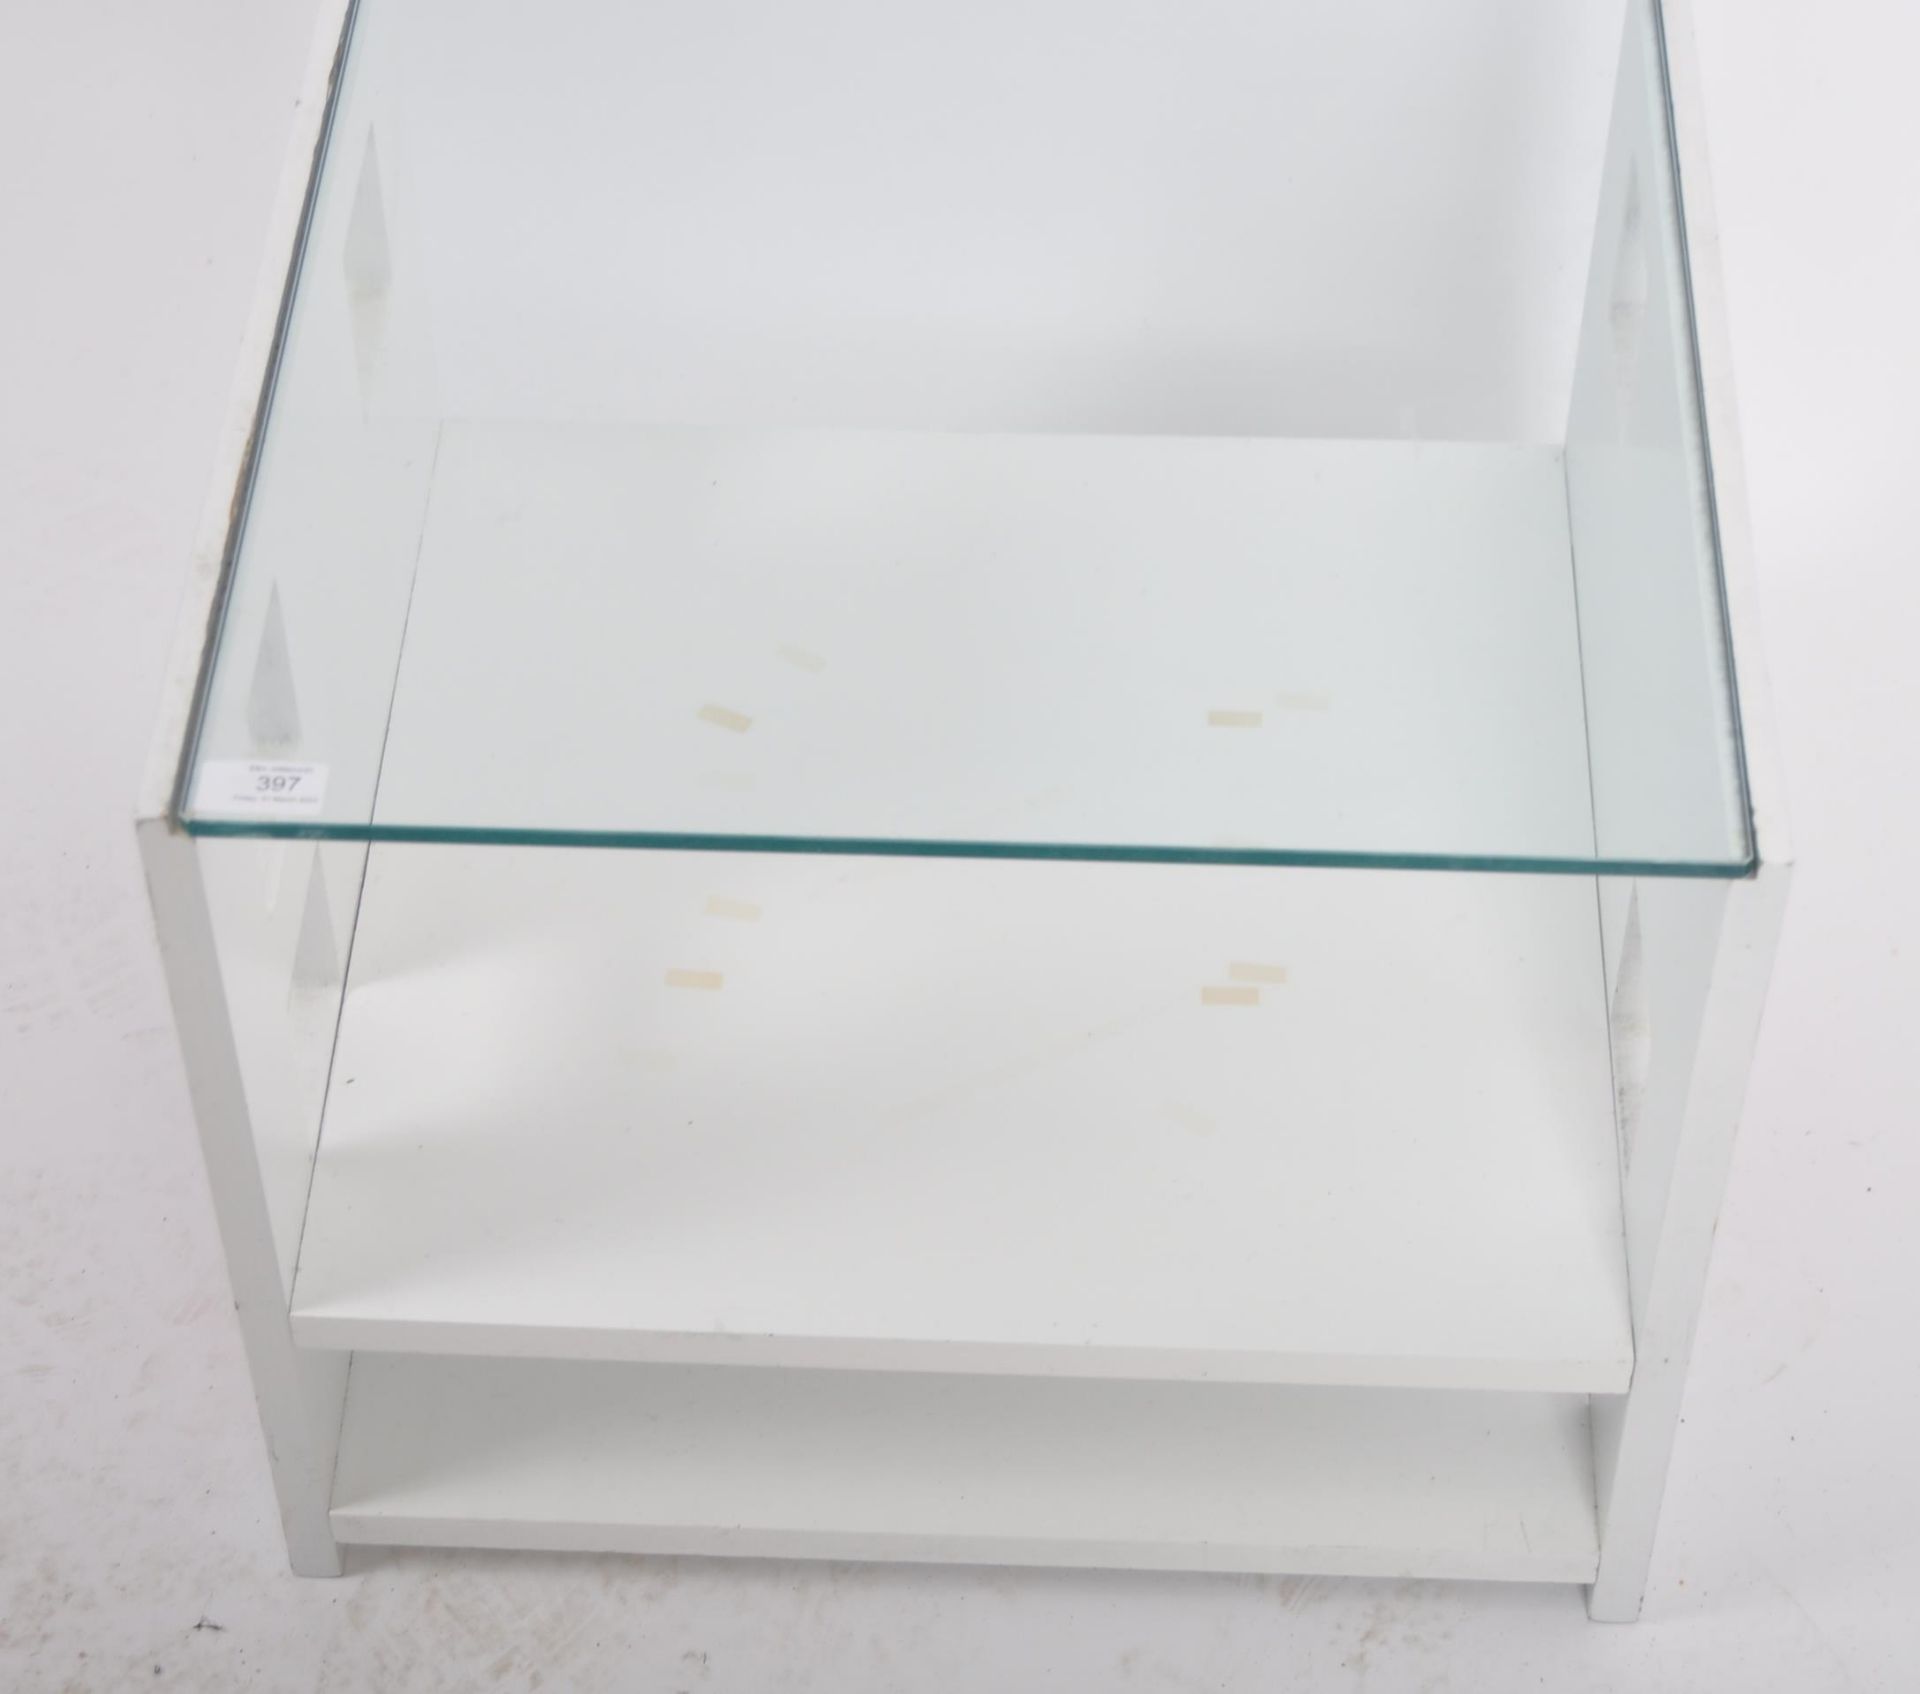 LATE 20TH CENTURY GLASS TOPPED SIDE OCCASIONAL TABLE - Image 4 of 6